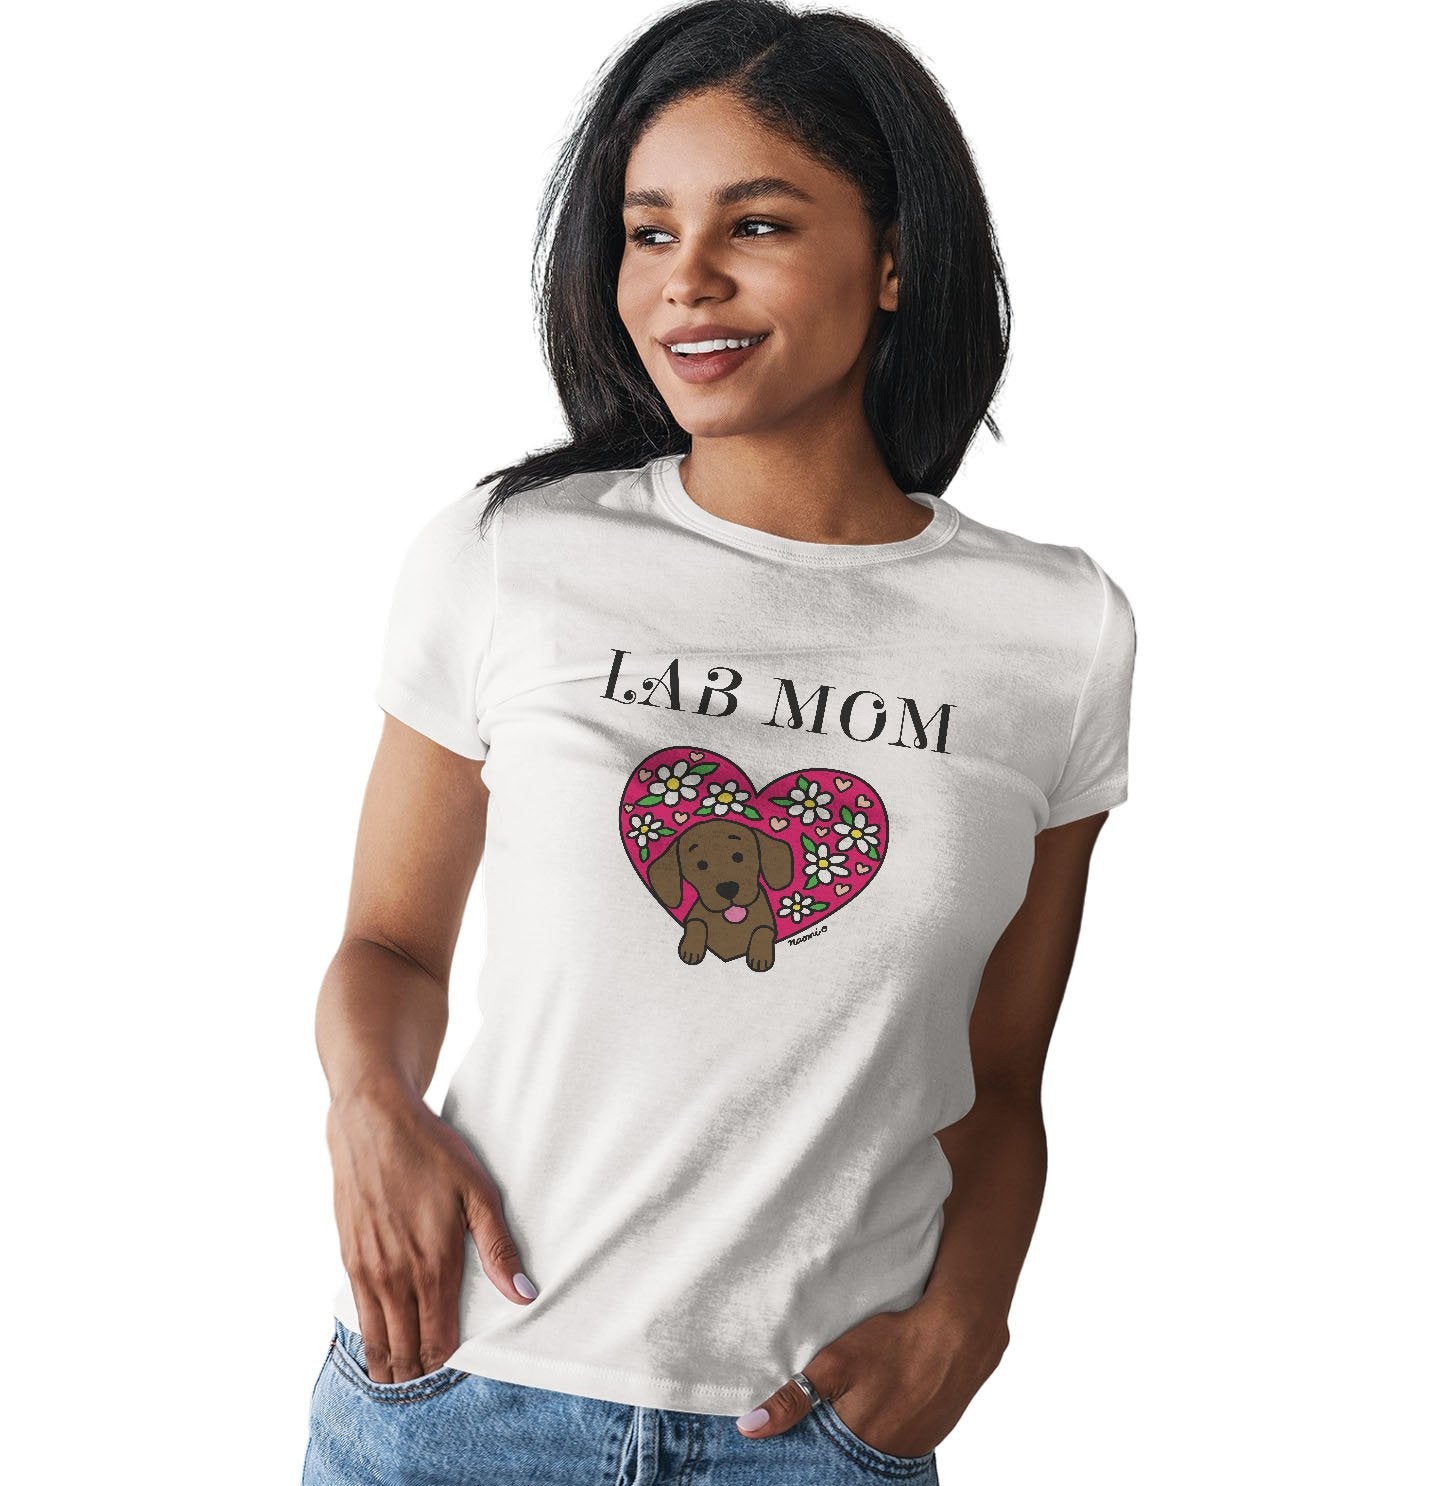 Flower Heart Chocolate Lab Mom - Women's Fitted T-Shirt